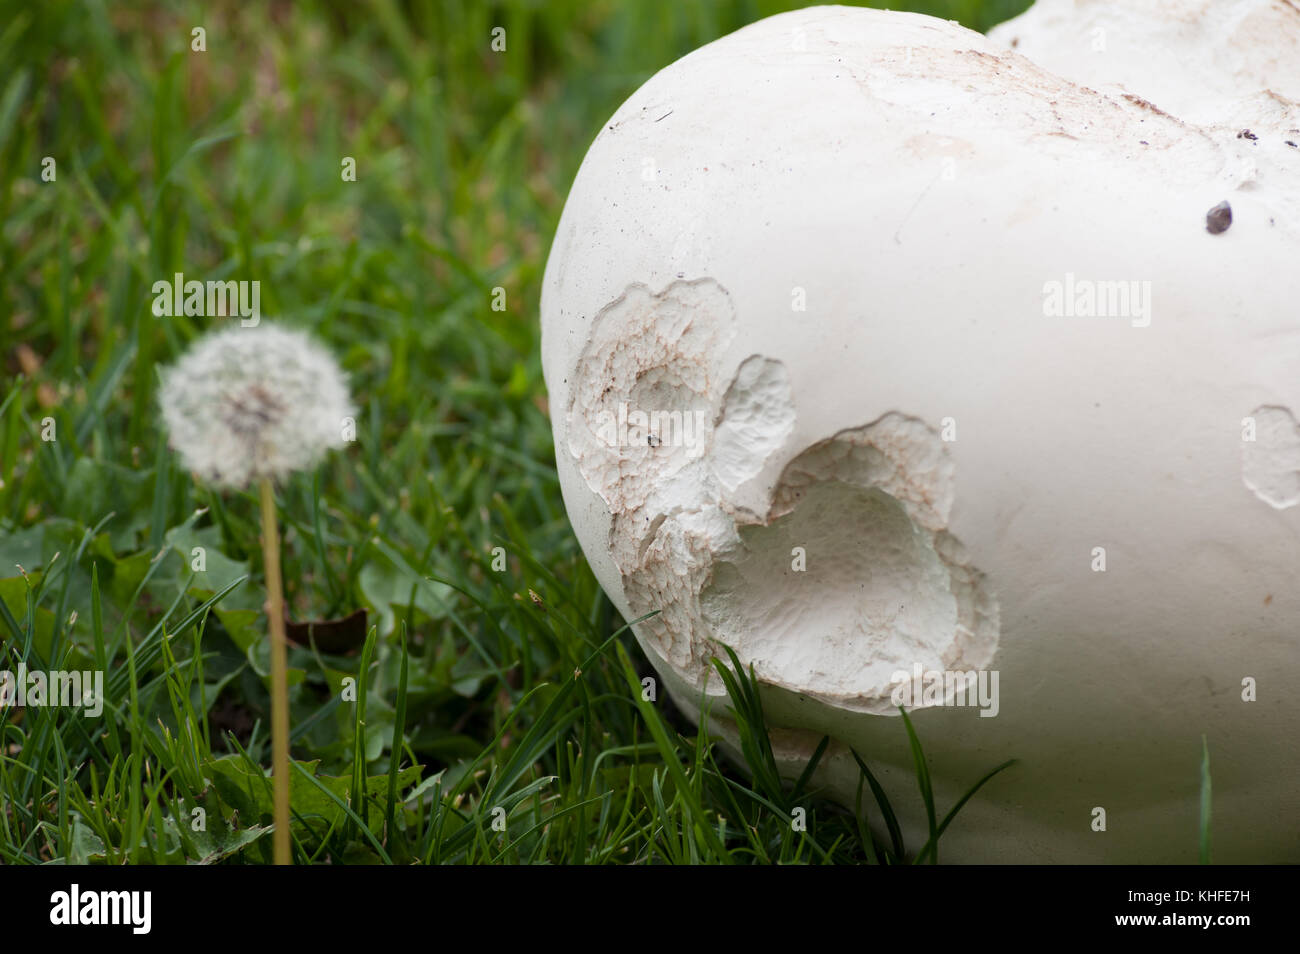 Giant puffball fungus maturing and soon to be ready to disperse its spores in the meantime it has been nibbled by slugs and mice Calvatia gigantea Stock Photo